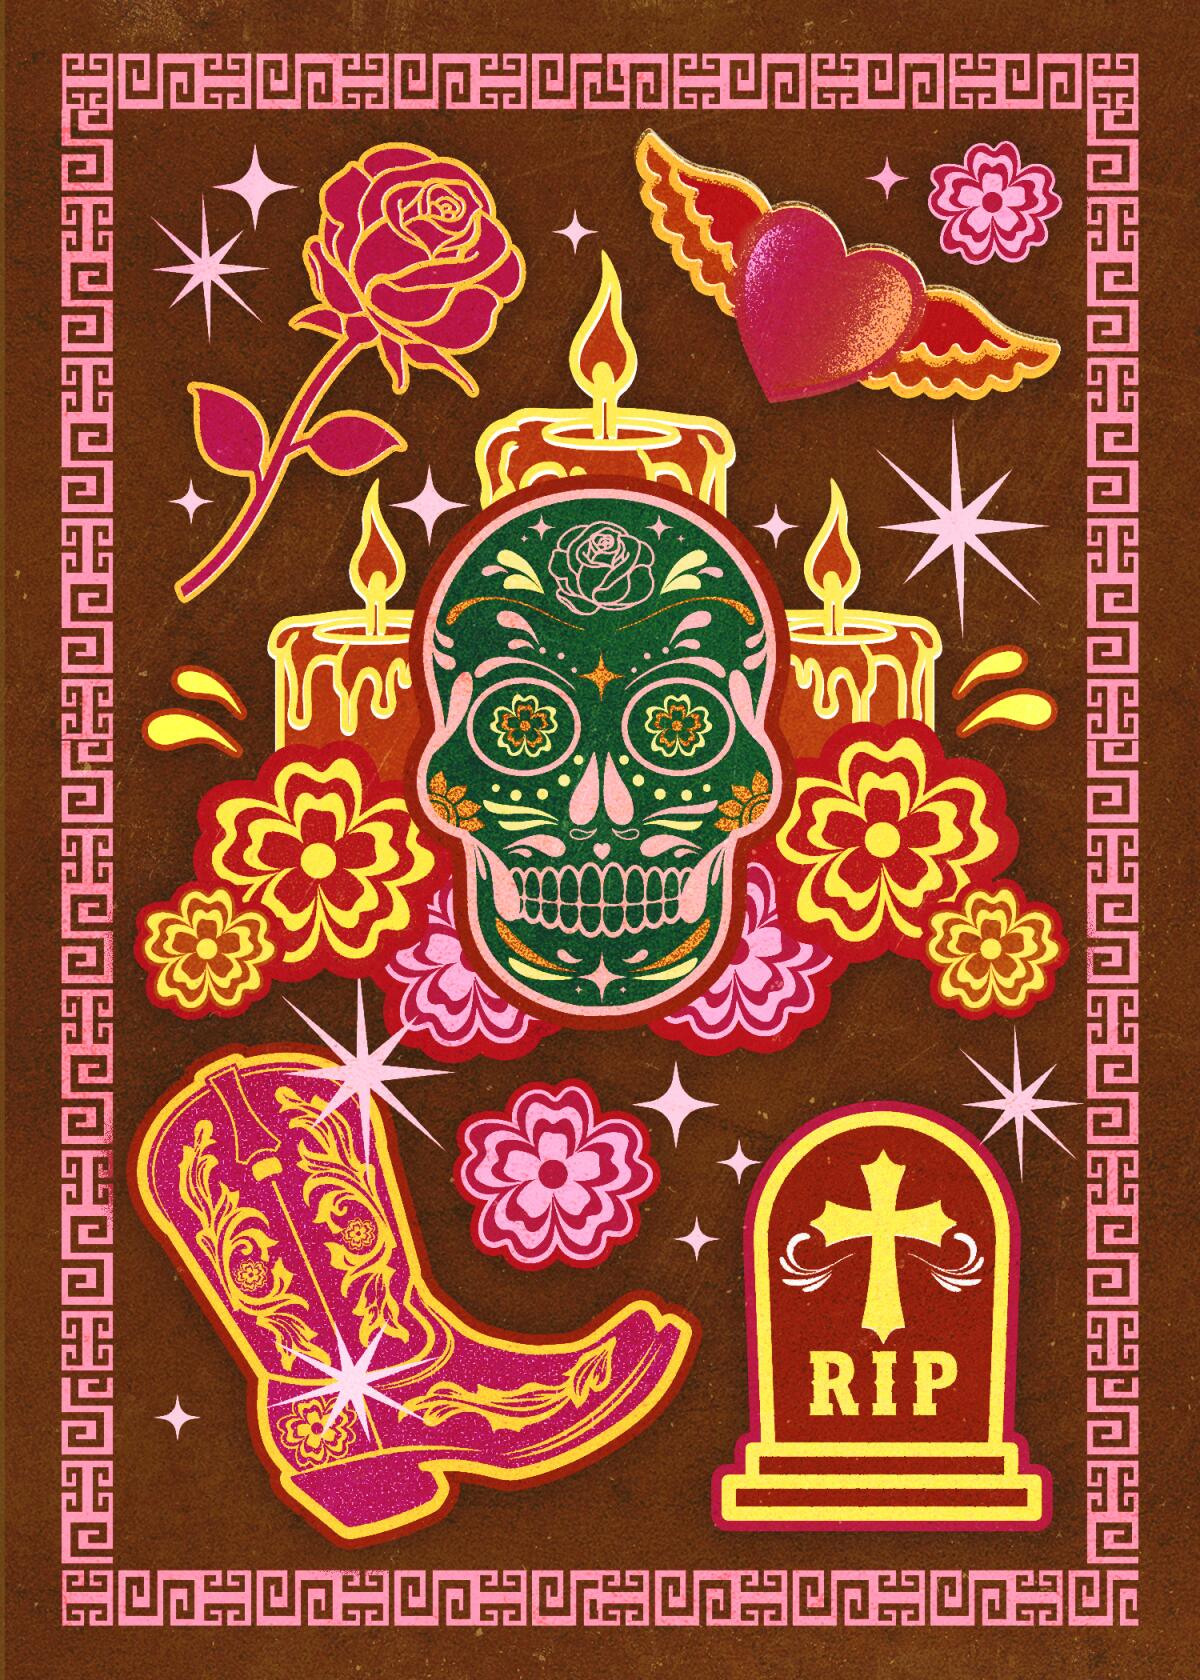 A skull is surrounded by candles, flowers, a tombstone, a boot, a rose and a heart with wings